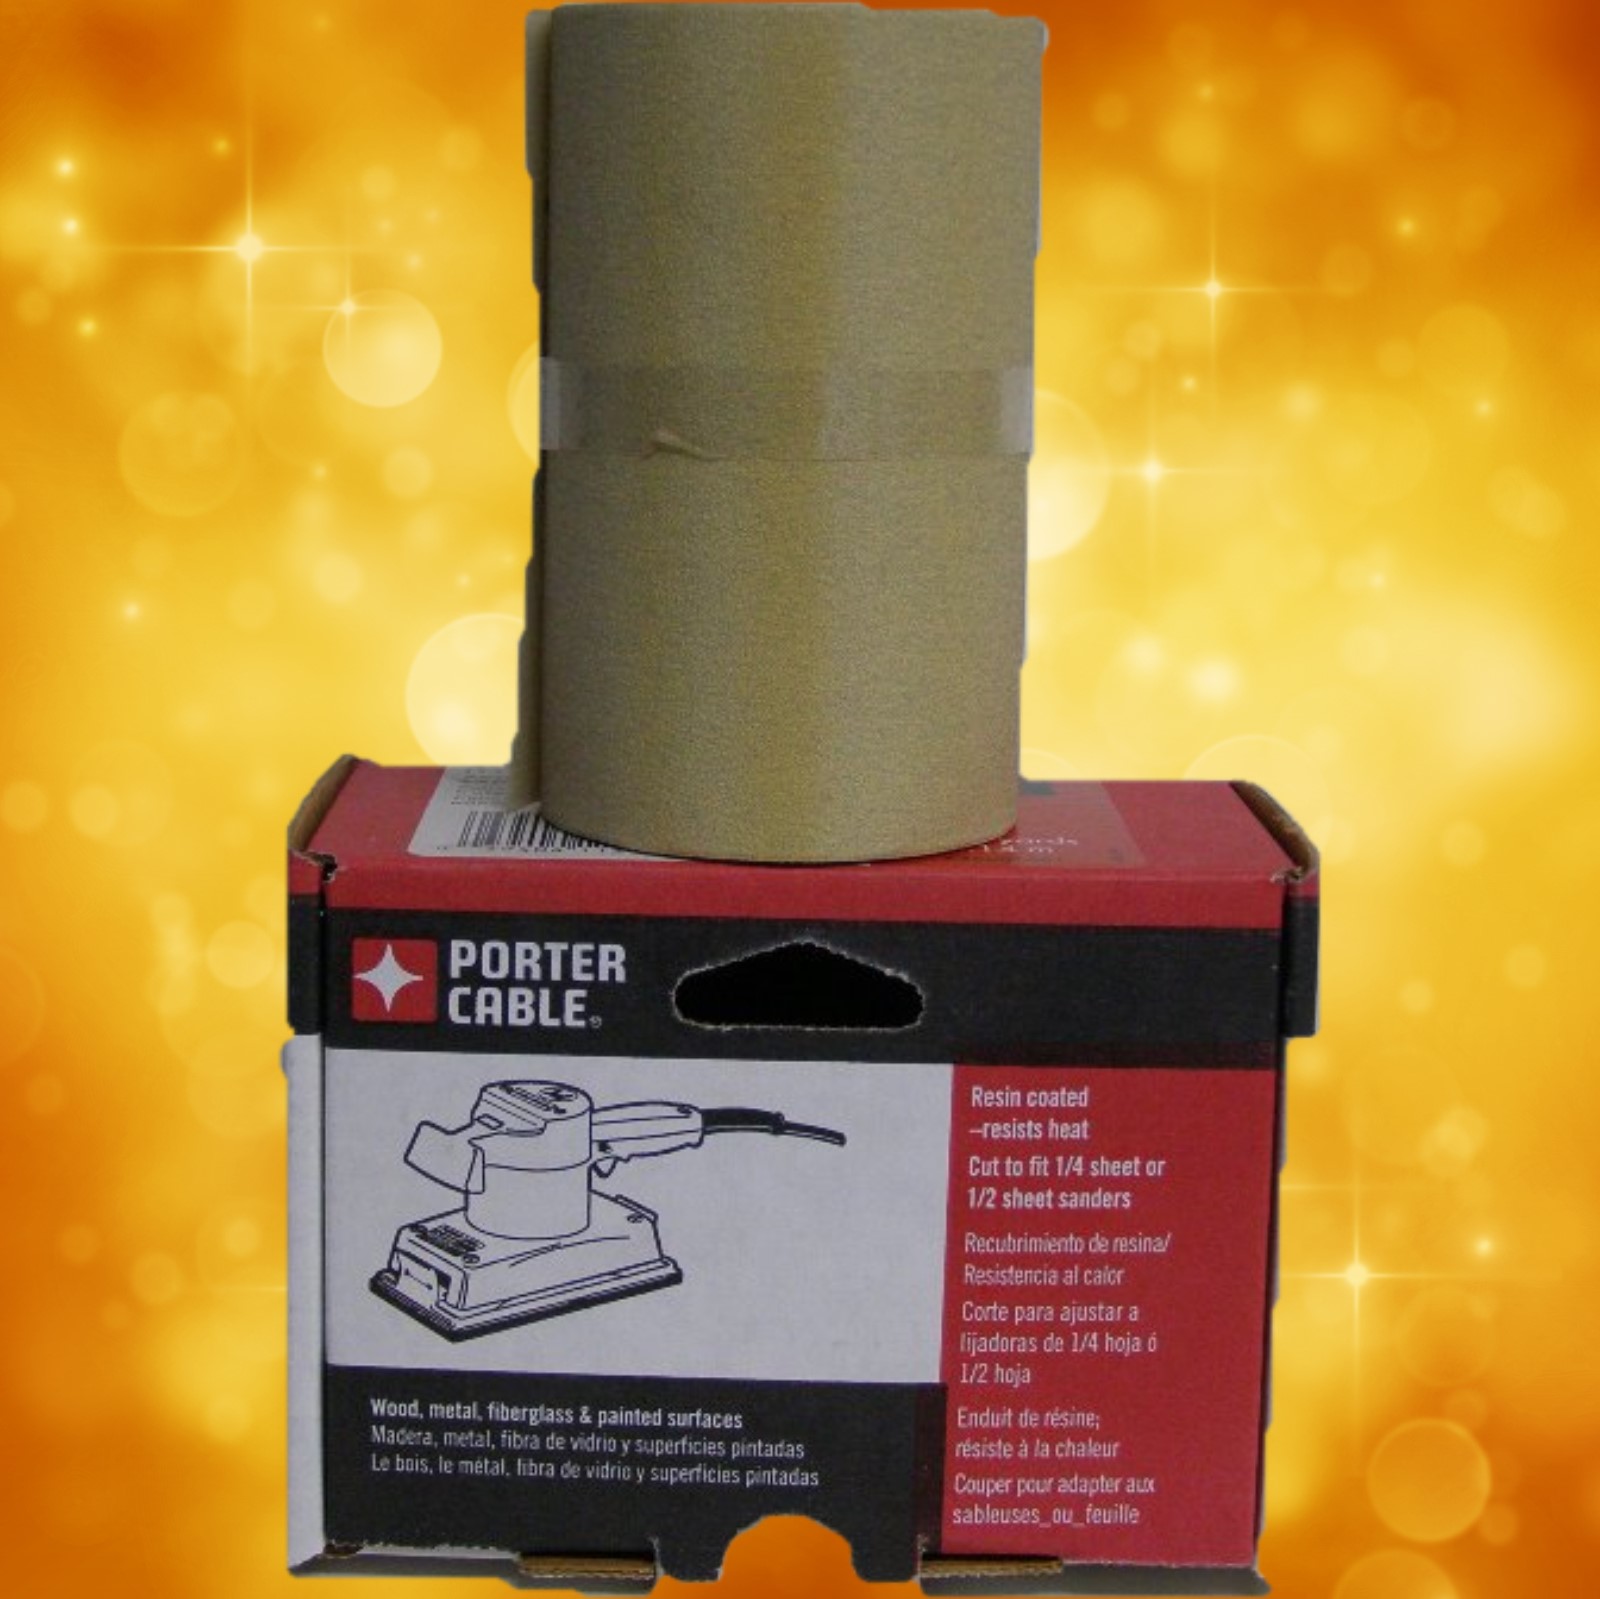 Porter-Cable 4-1/2" x 10 Yard, Adhesive-Backed Sanding Roll - 150 Grit 740001501